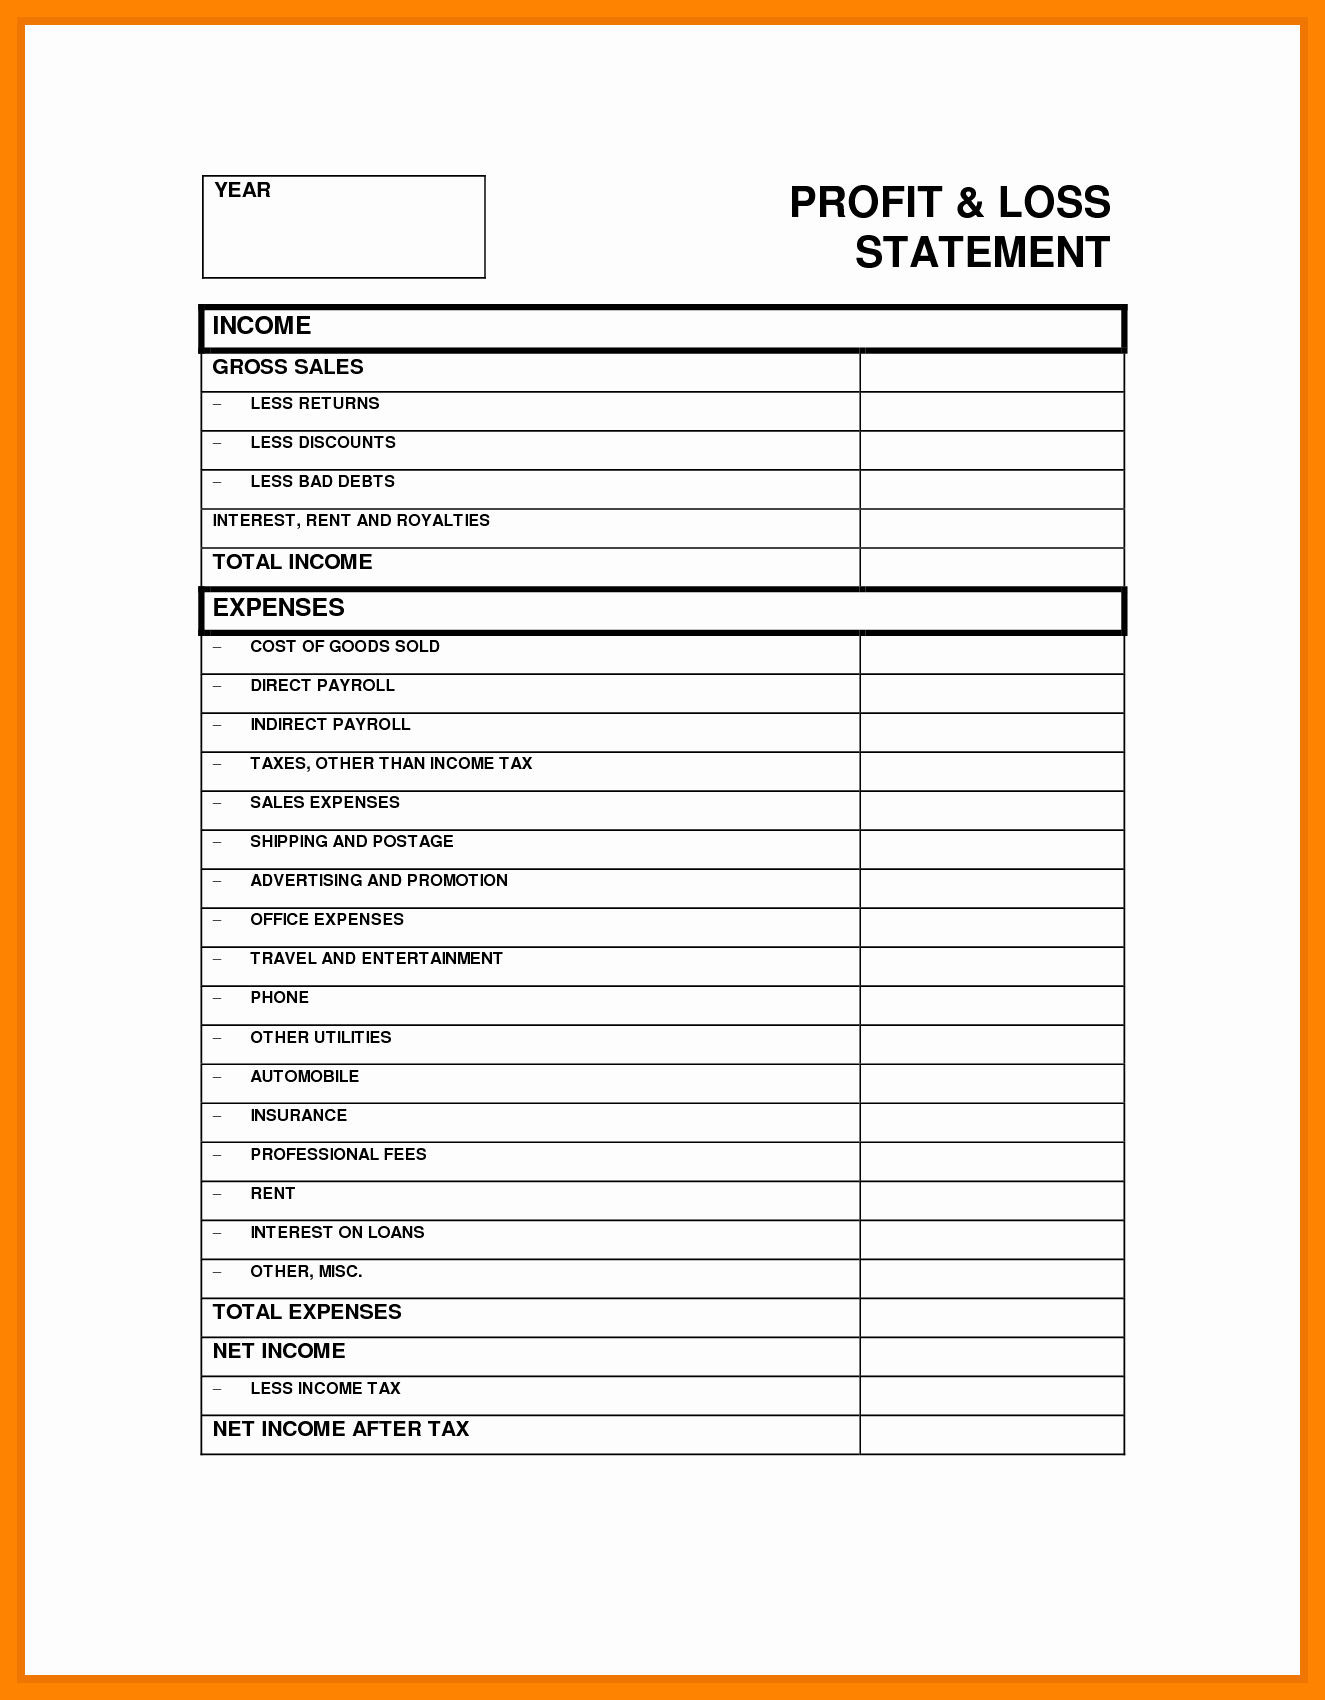 Profit and Loss Report Template Beautiful Free Profit Loss Statement Statement Trakore Document